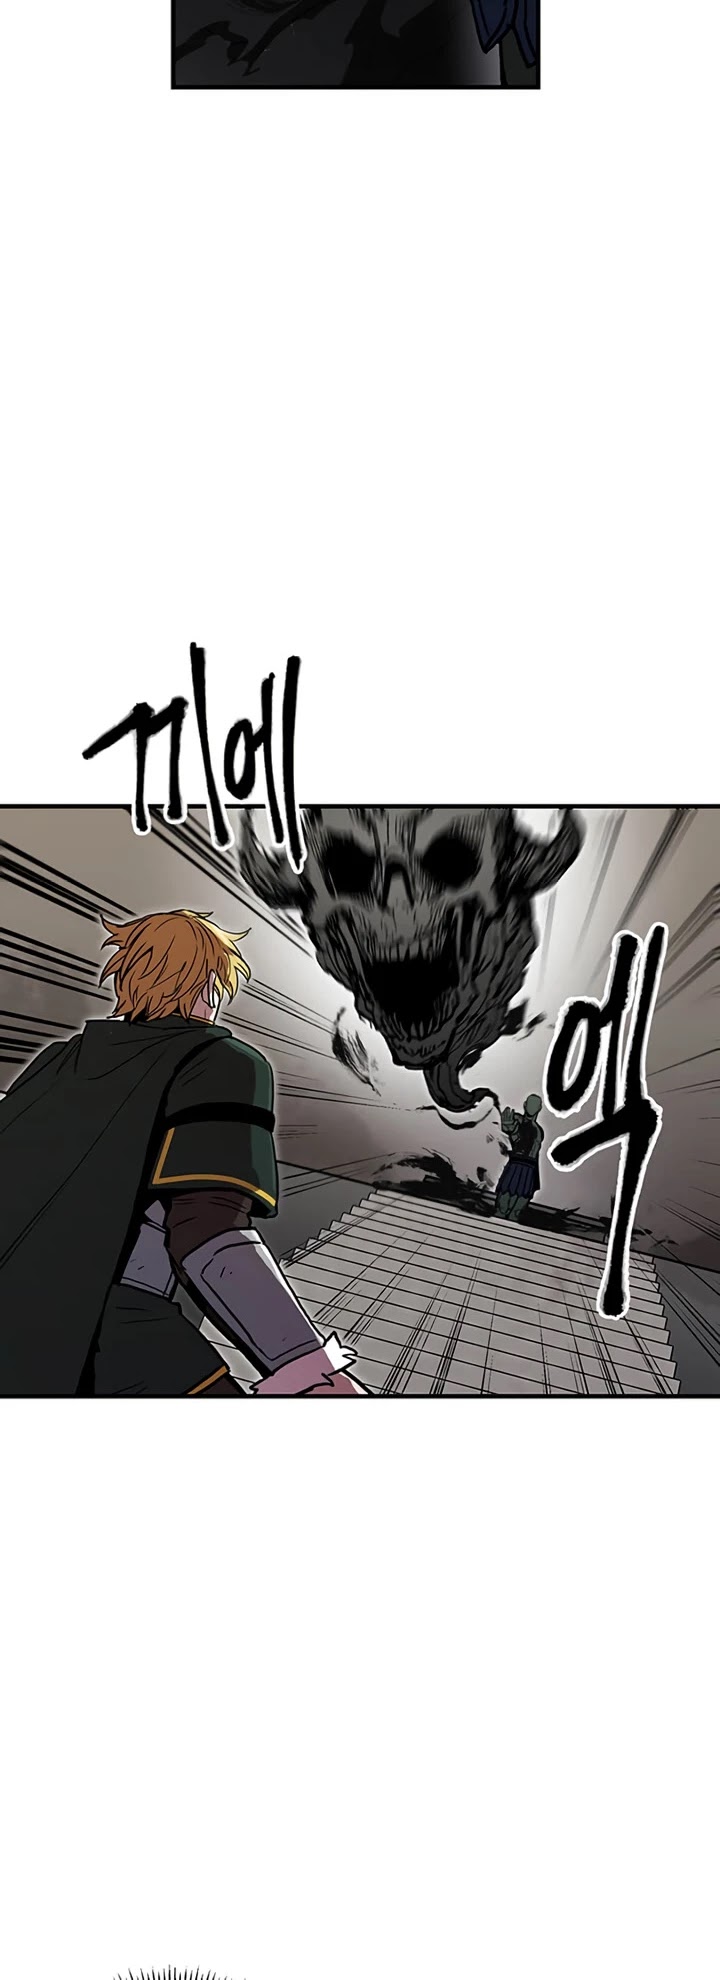 Solo Bug Player, Solo Bug Player manga, Solo Bug Player manga online, read Solo Bug Player, read Bug Player, Bug Player manga, Bug Player manga online, read Bug Player manga, Solo Bug Player manhwa, Solo Bug Player manhwa online, Bug Player manhwa, Bug Player manhwa online, read Bug Player manhwa, bug player novel wiki, solo bug player 11, solo bug player 17, bug player raw, bug player chapter 8, bug player chapter 14, bug player novelupdates, bug player chapter 9, bug player chapter 15, bug player chapter 20, bug player 21, bug player 14, bugbear player race 5e, bug solo player, bug solo player manga, bug head emperor player download, big w dvd player, bug freebox delta player, bug player devialet, bug be player, bug flash player dofus, big multiplayer game, bug player map, bug player neox, bug player pop, bug player pick fifa 20, bug player pick fifa 21, bug player pt br, bug player pick, bug player pop free, bug player novel pdf, bug player freebox pop, bug player novela ligera pdf, bug quicktime player mac, is quicktime player safe for mac, how do i get quicktime player on my mac, how do i get quicktime player to work on my mac, how to hide quicktime player control mac, can't play quicktime on mac